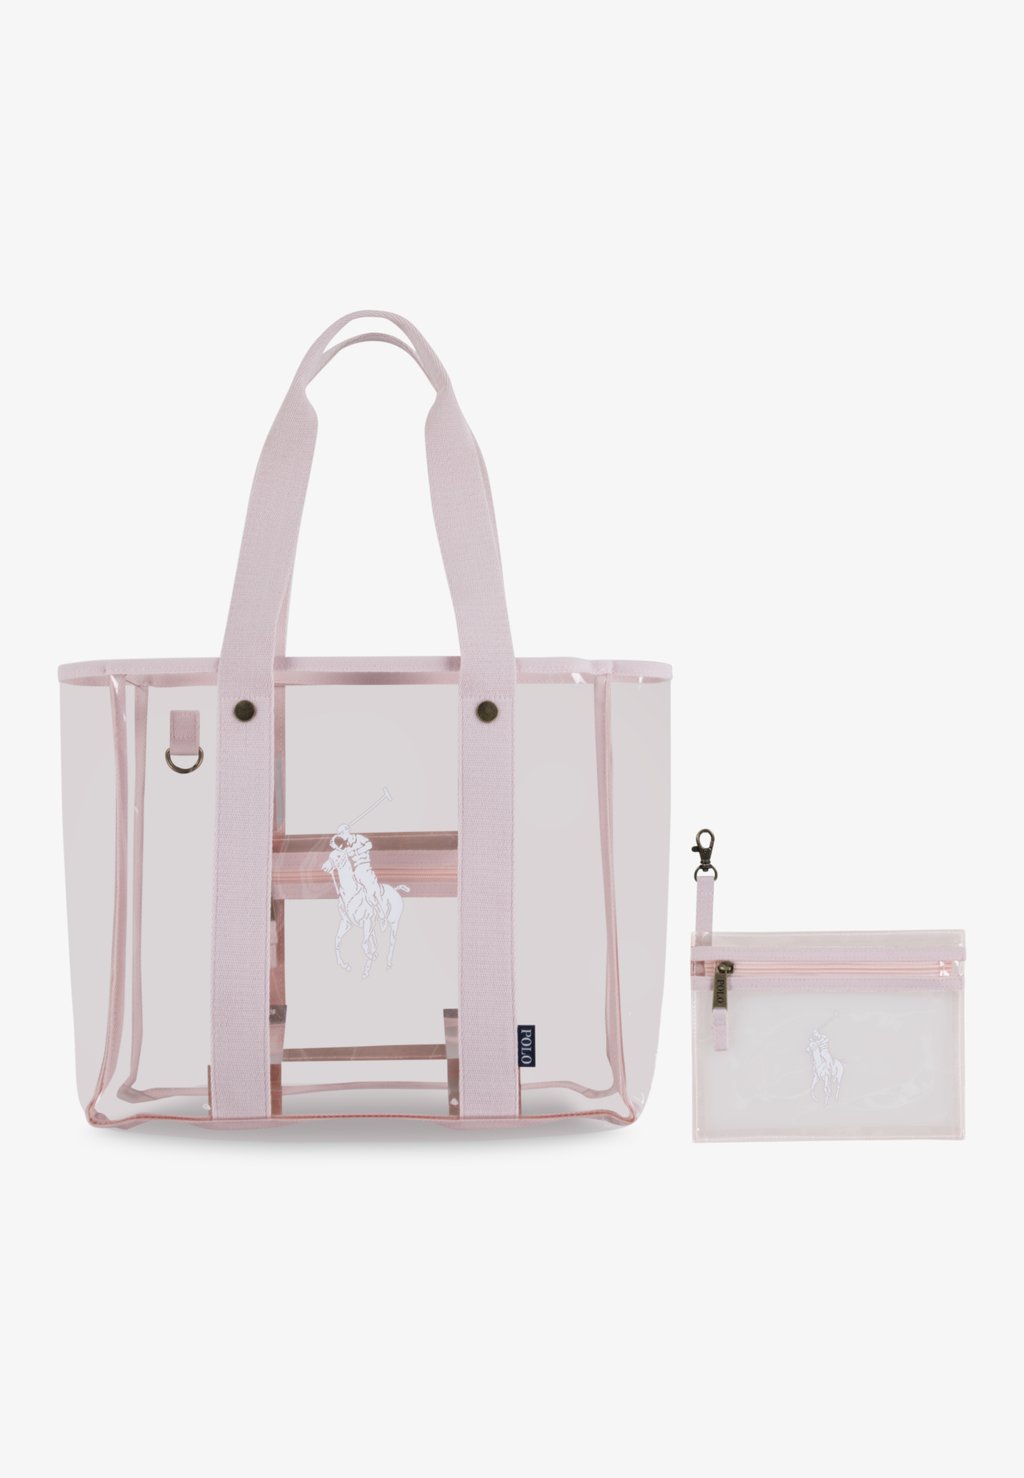 Сумка для покупок CLEAR TOTE WITH POUCH UNISEX Polo Ralph Lauren, цвет hint of pink